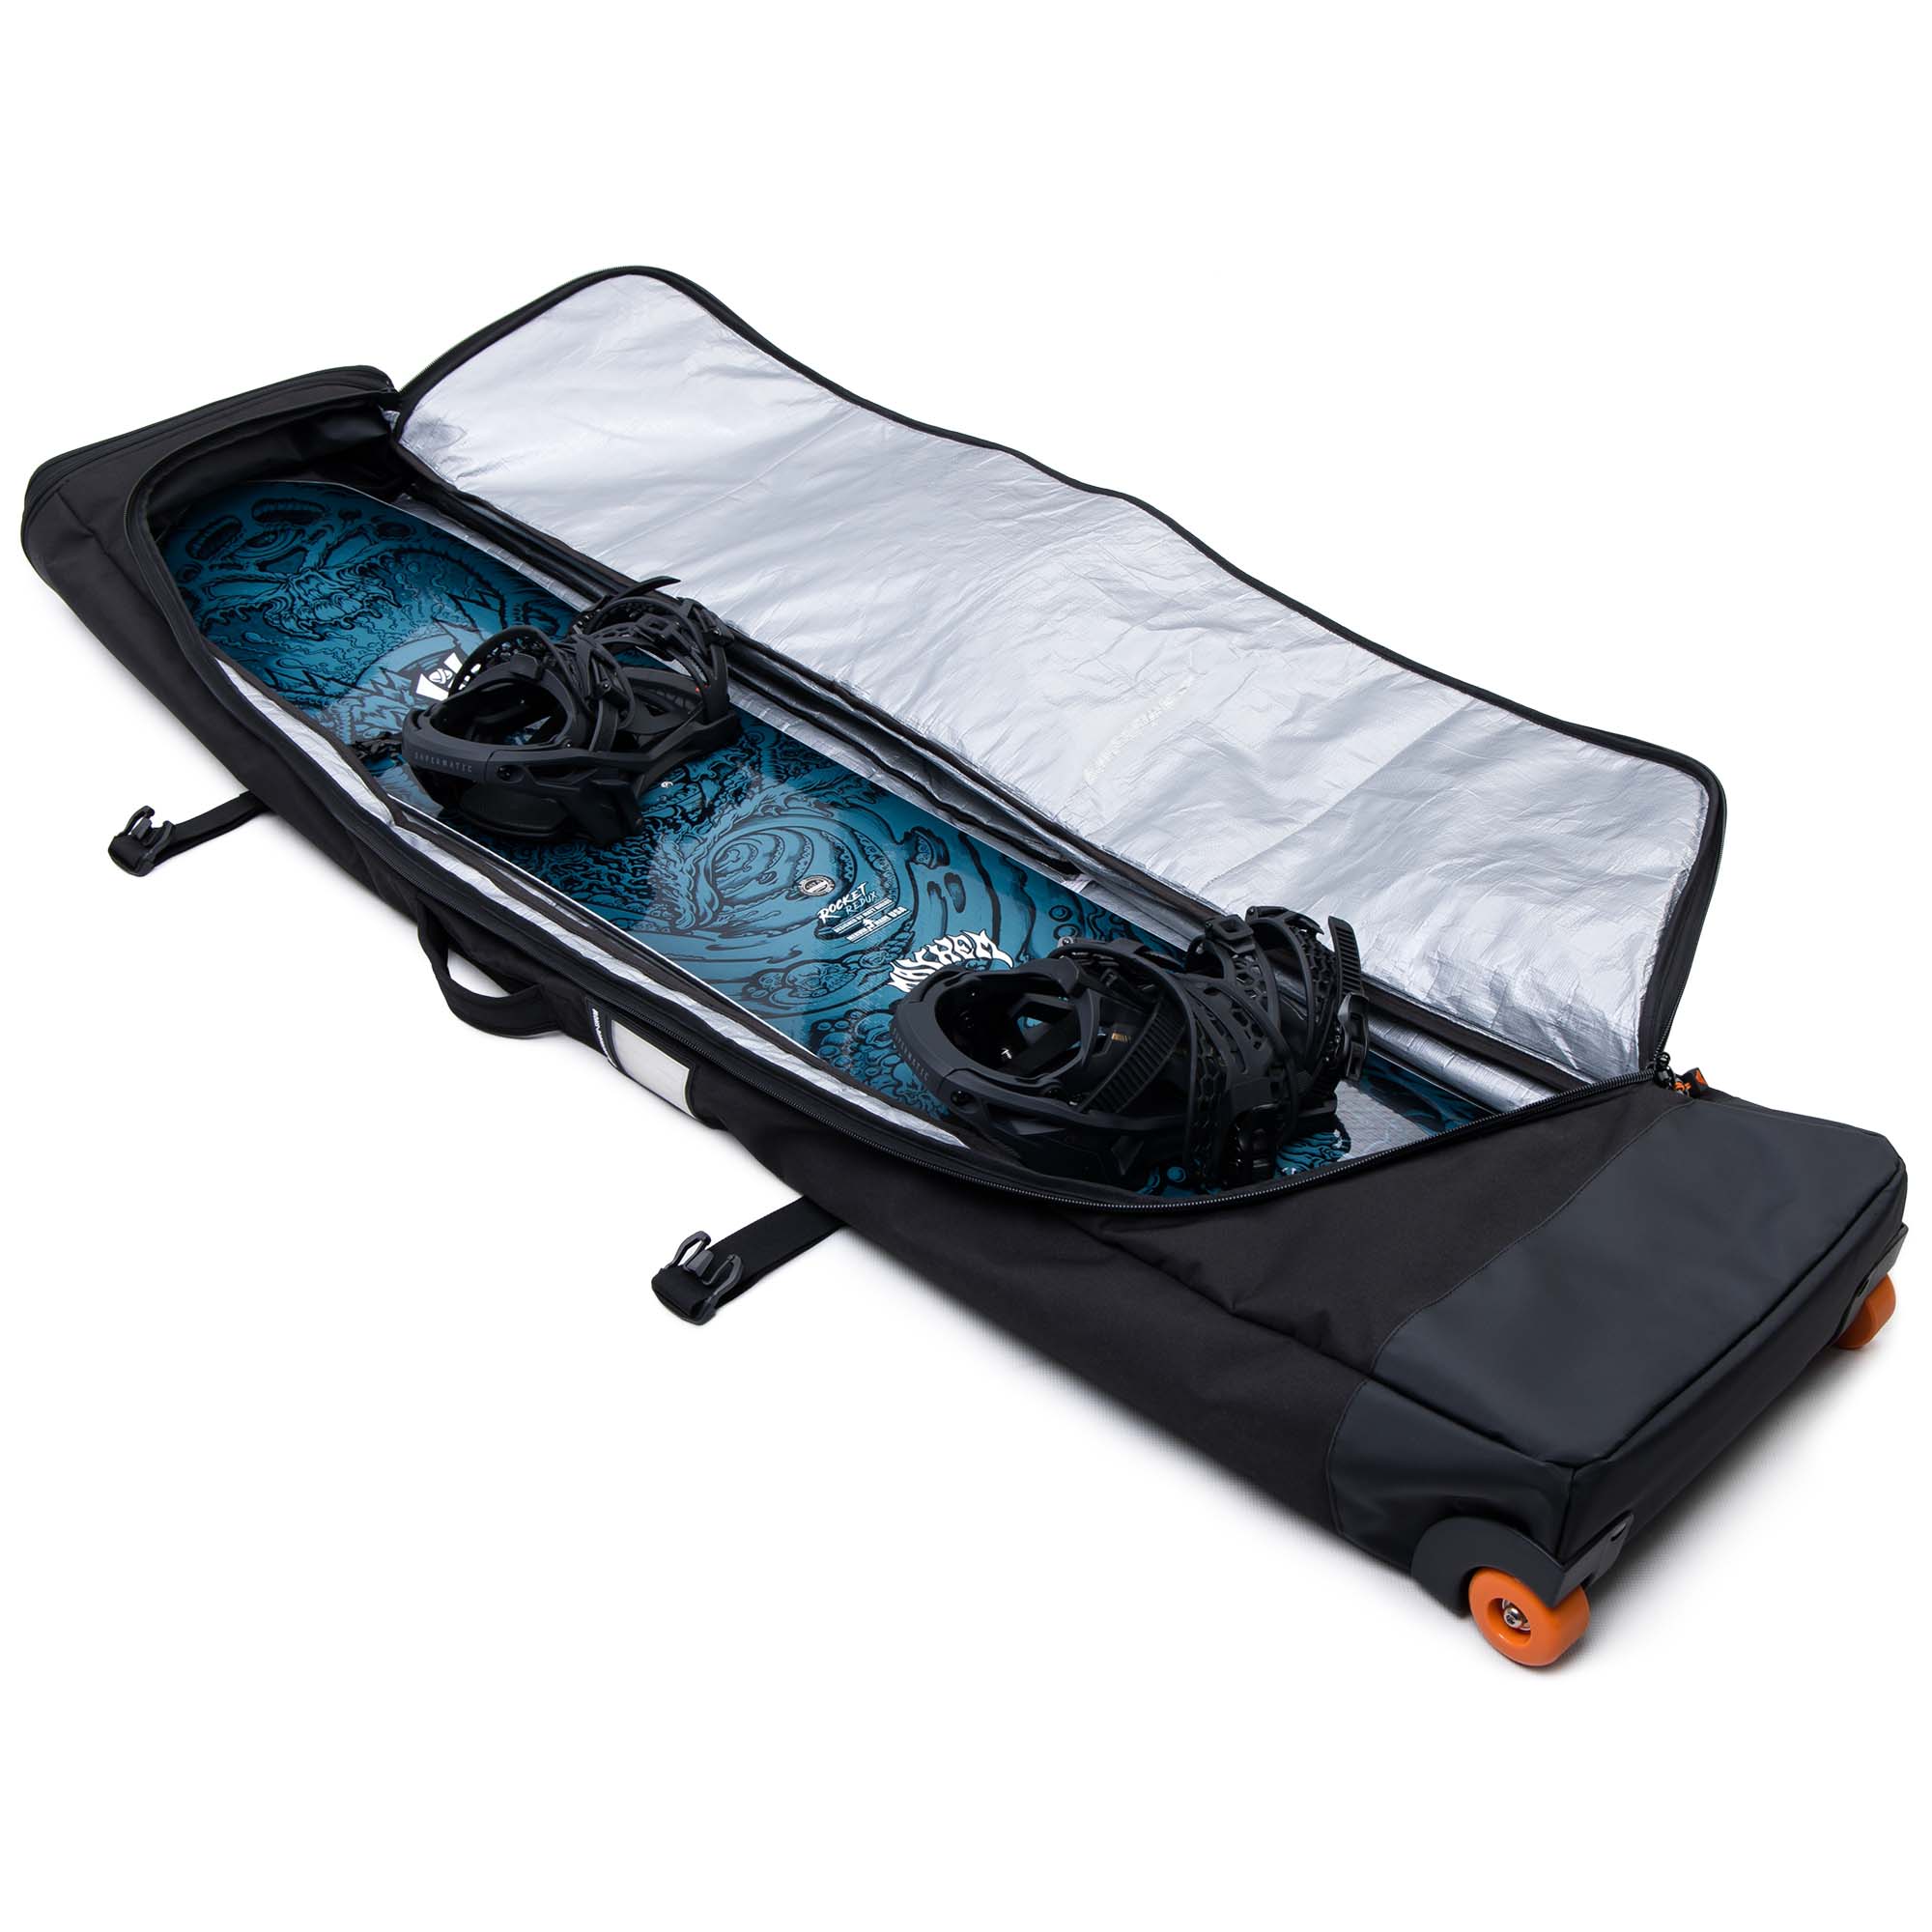 Absolute Expandable Roller Ski/Snowboard Wheeled Travel Bag